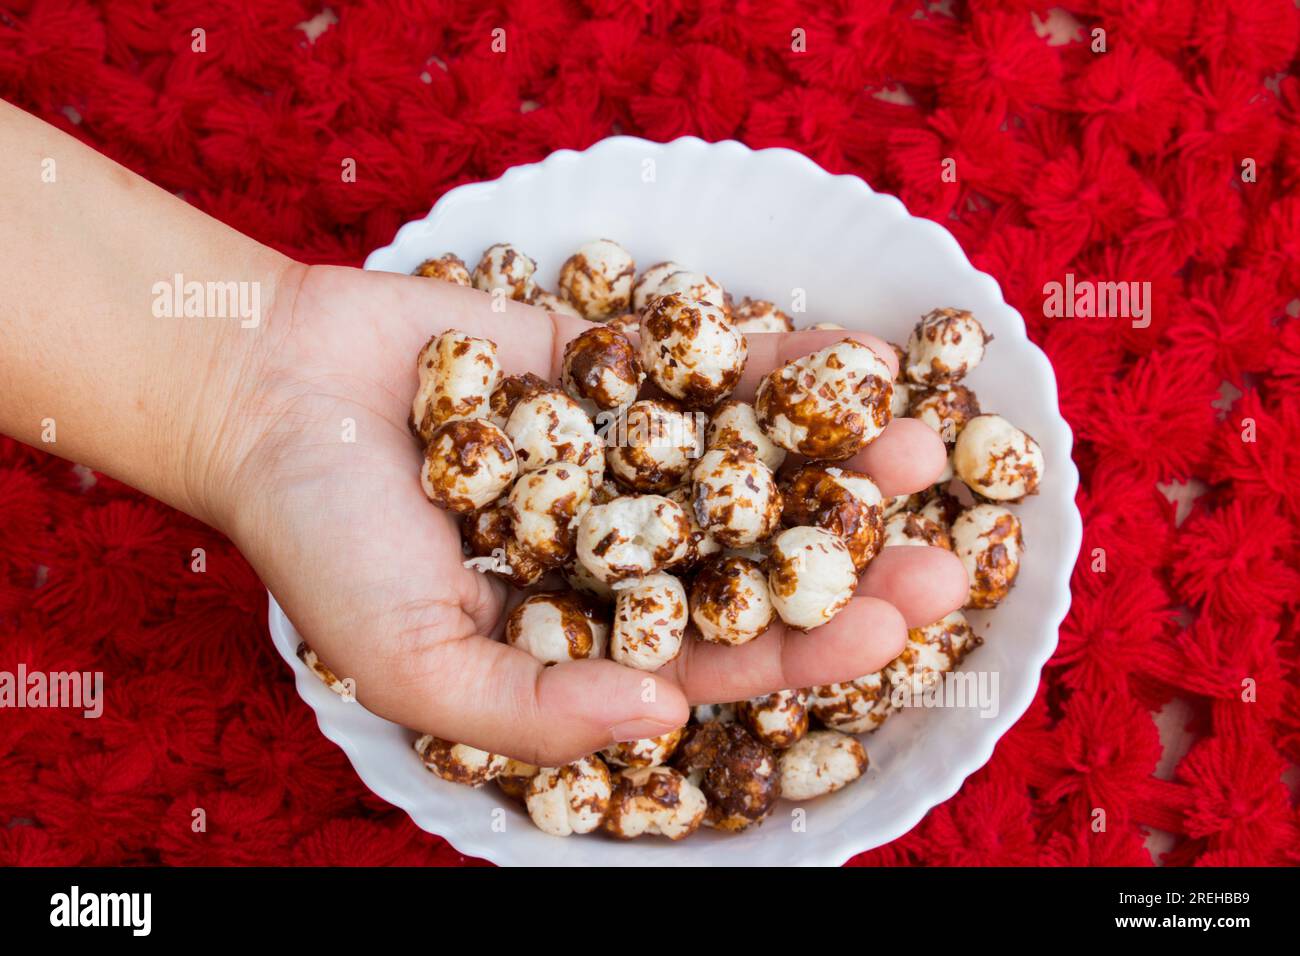 Hand holding healthy Chocolate and jaggery coated makhana in beautiful red background. copyspace Stock Photo